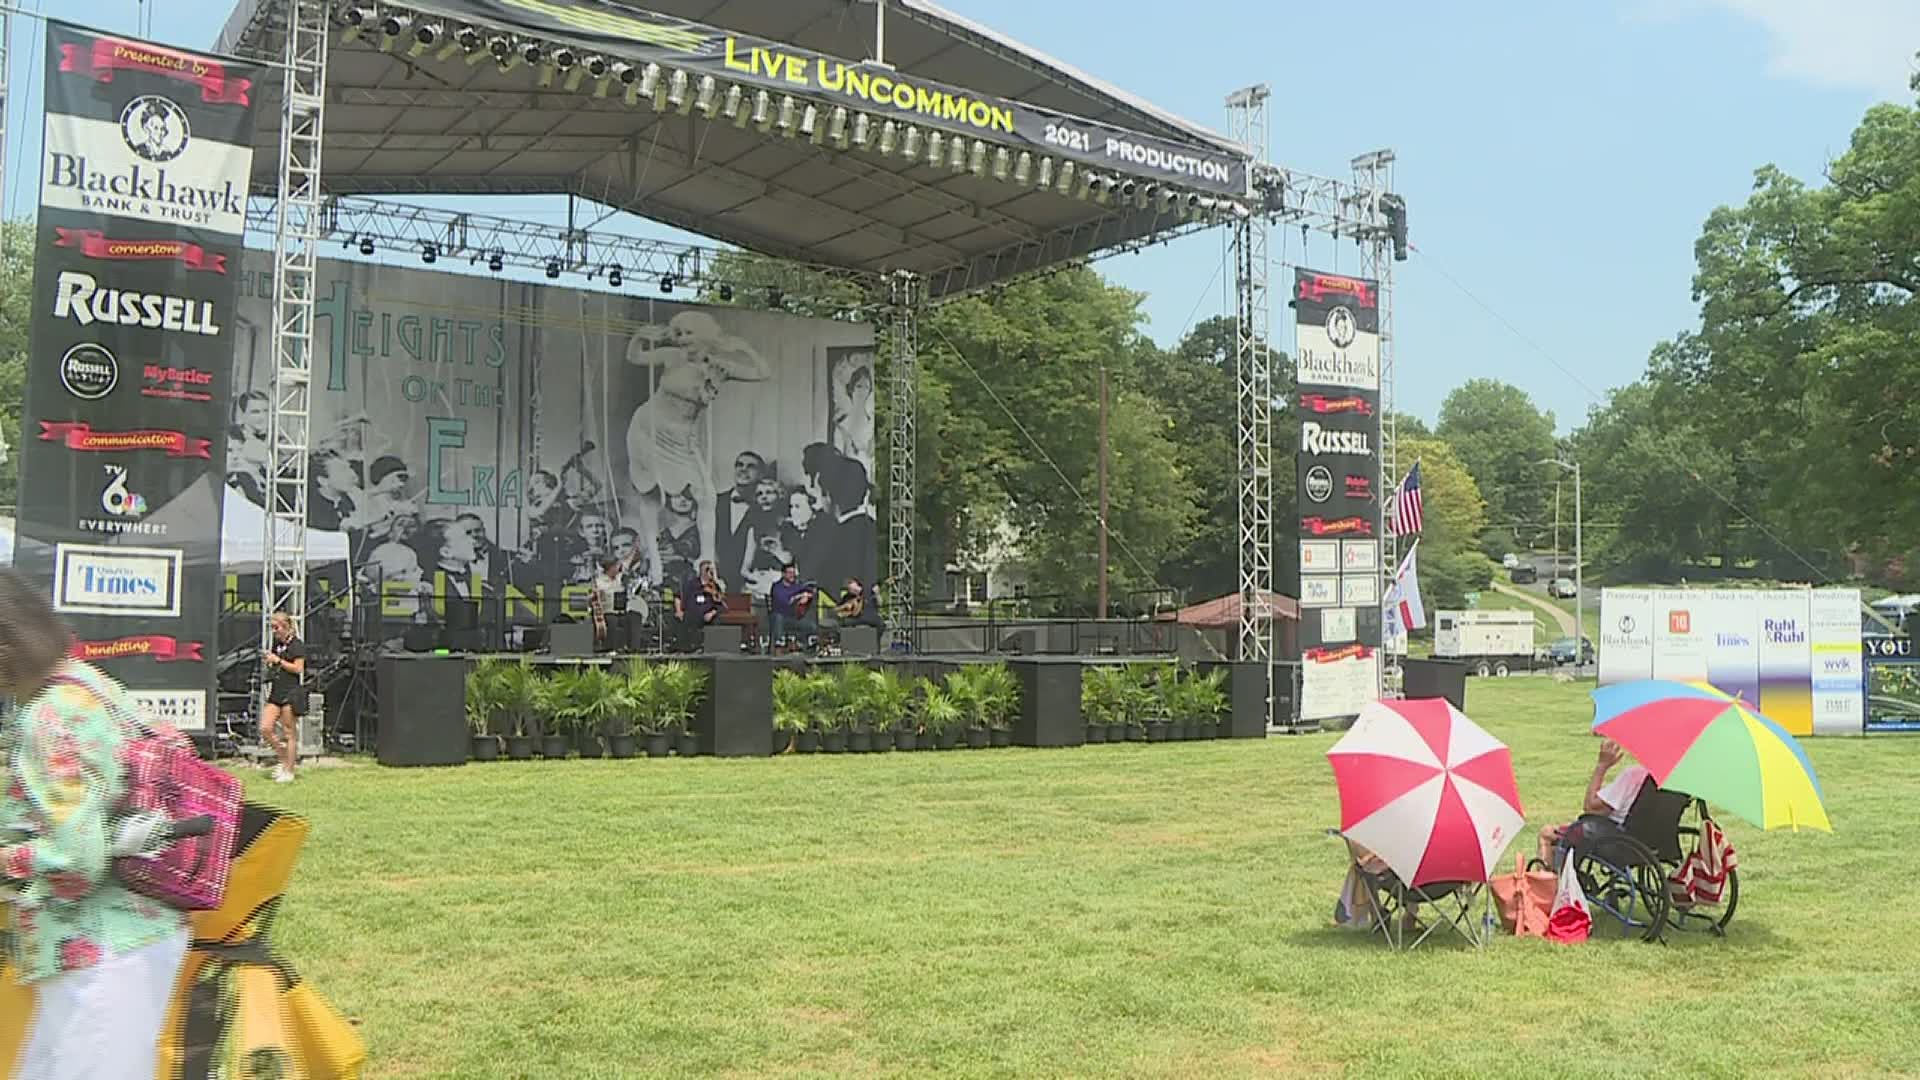 The jazz fest kicks off its first year.